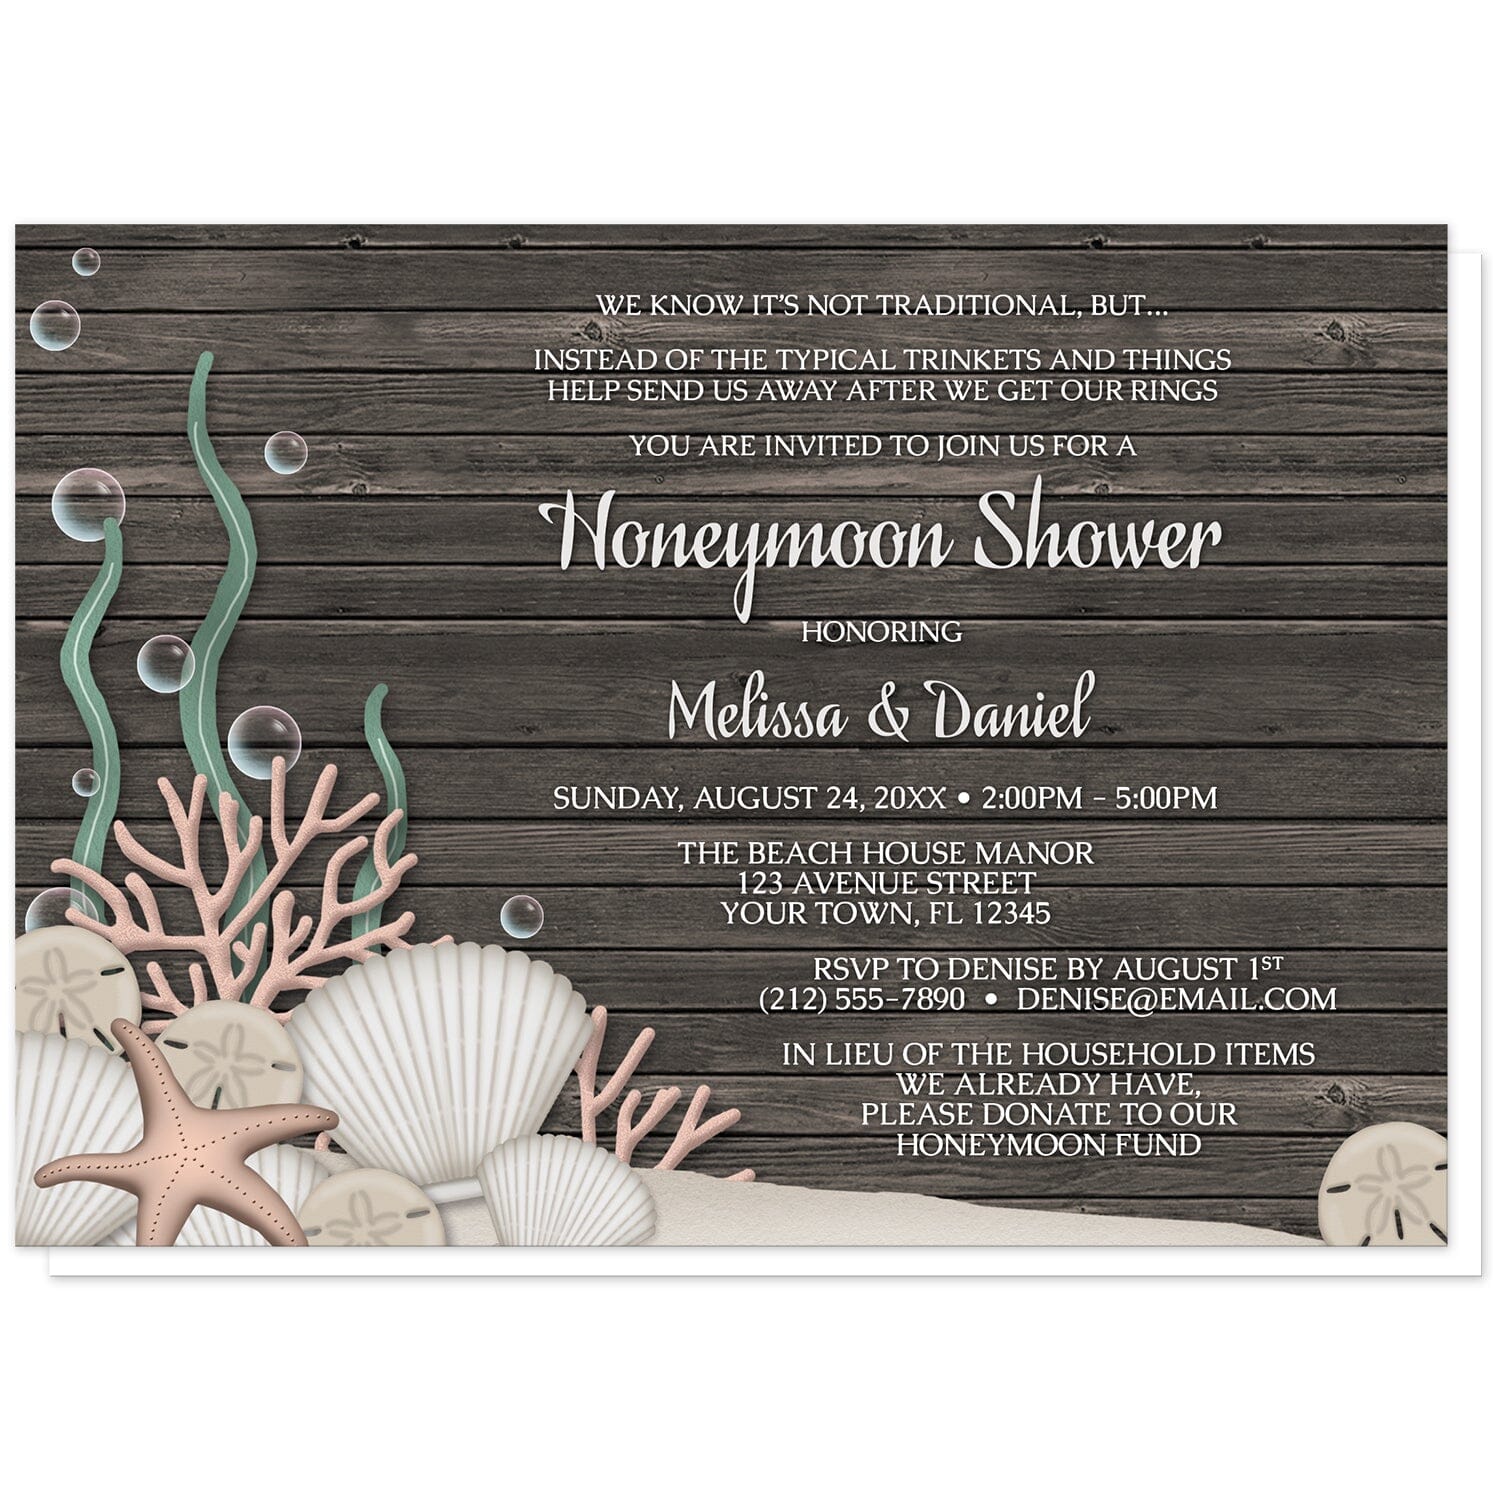 Rustic Beach Seashells and Wood Honeymoon Shower Invitations at Artistically Invited. Rustic beach seashells and wood honeymoon shower invitations with a rustic "on the beach" or "under the sea" theme. They are designed with a dark wood pattern, sandy seabed, assorted seashells, coral, and kelp. Your personalized honeymoon shower celebration details are custom printed in white over the wood background.